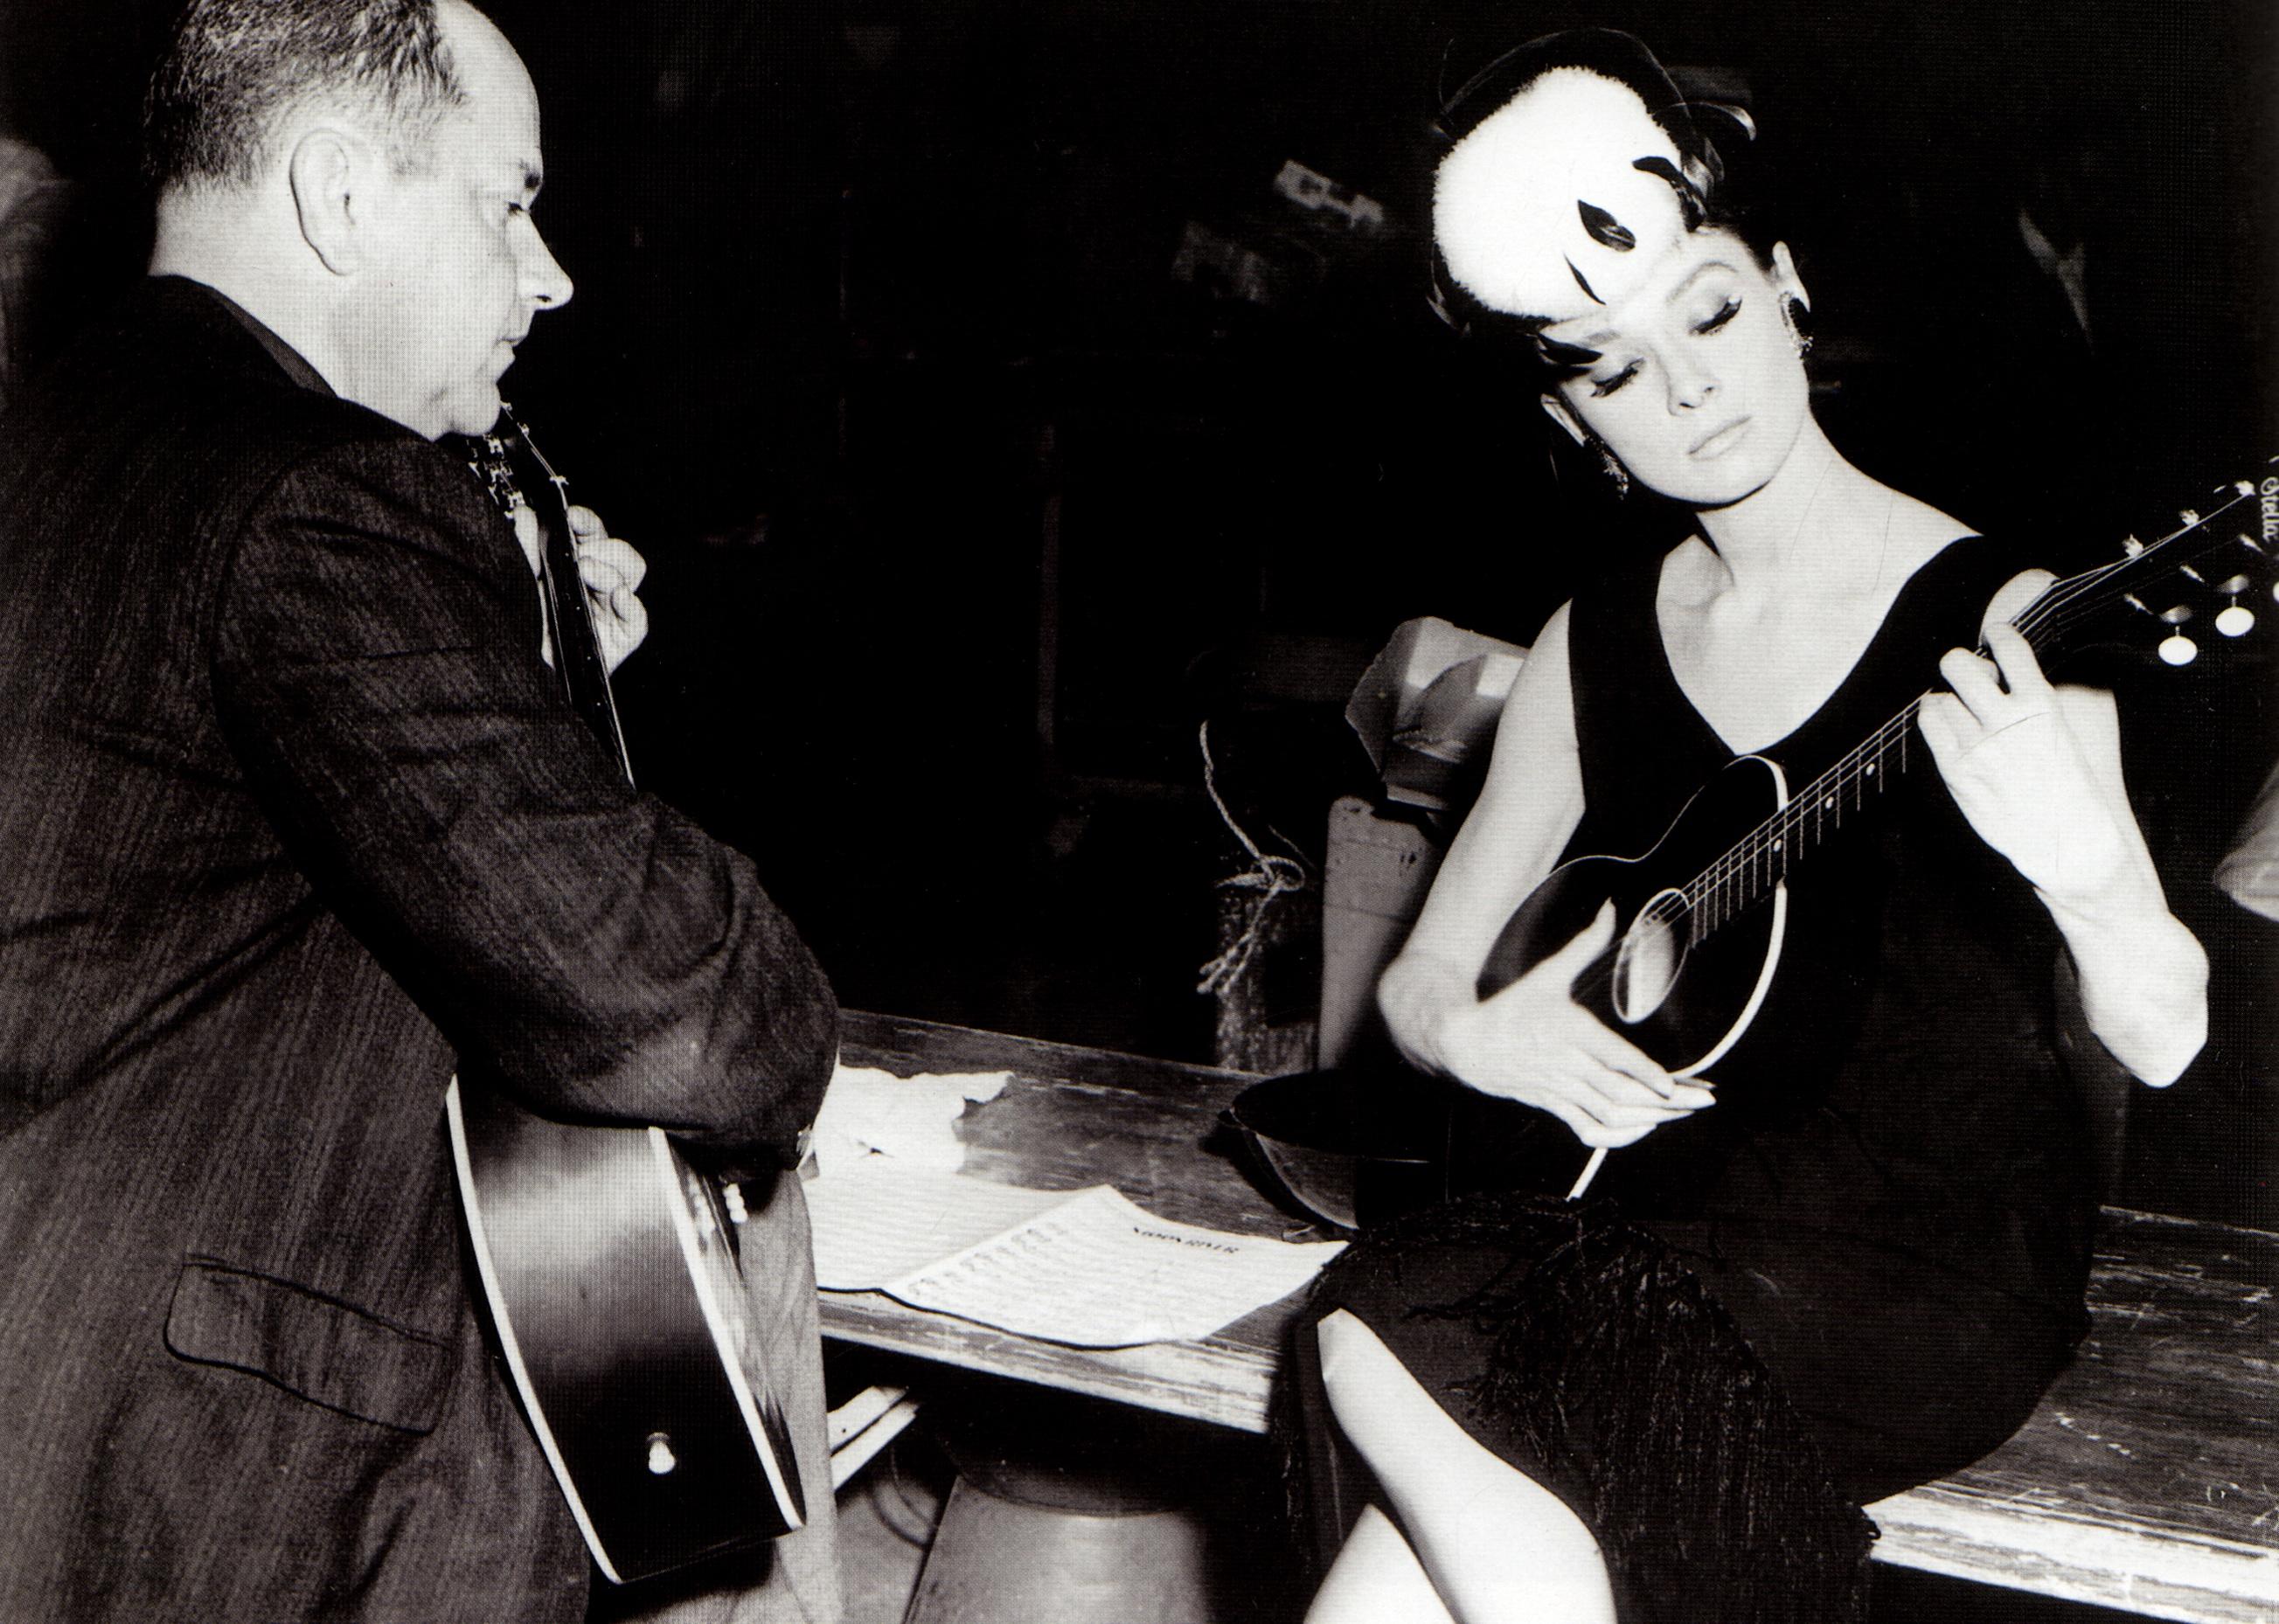 Henry Mancini and Audrey Hepburn playing guitars together.